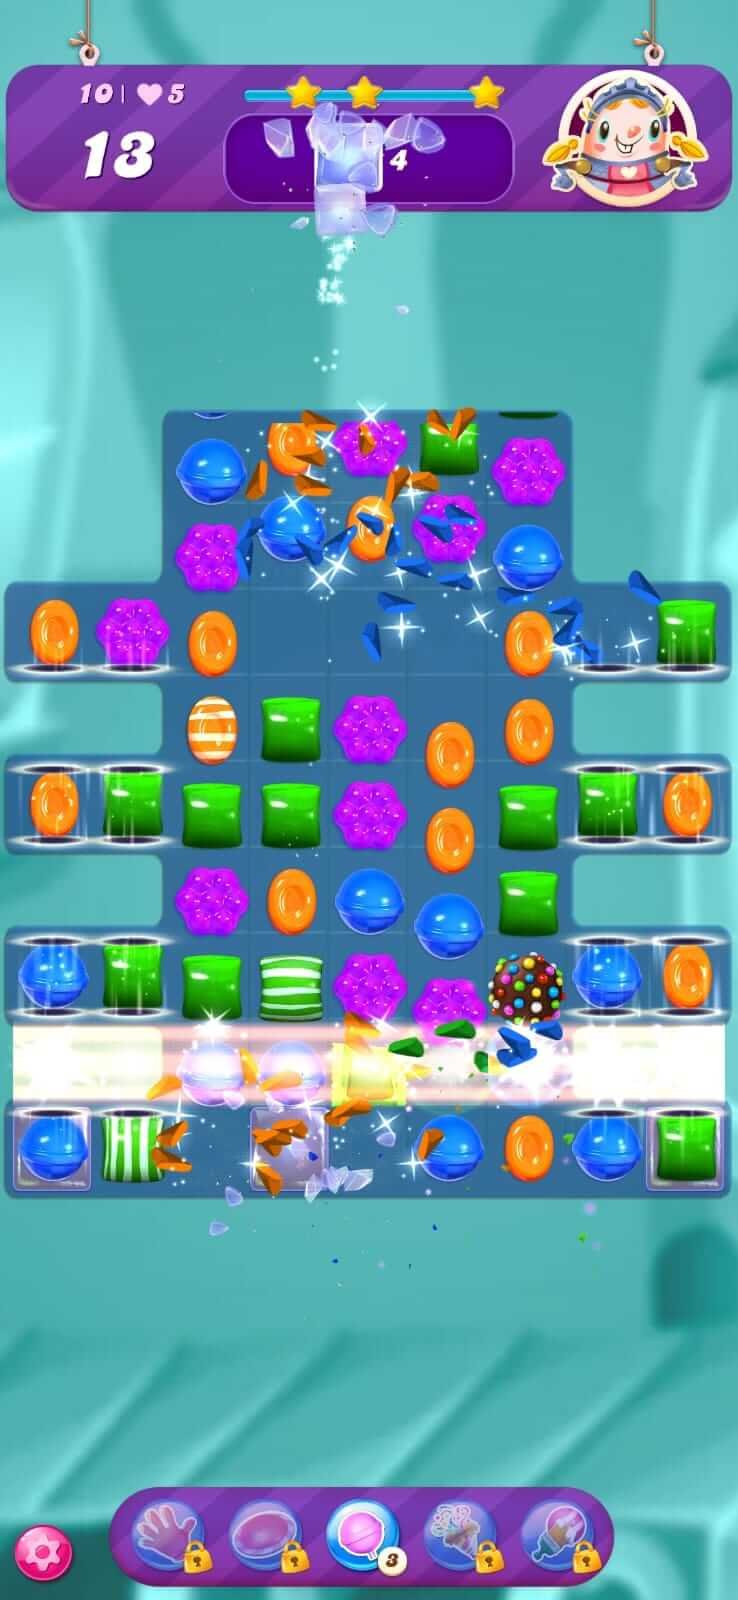 Download Candy Crush Saga MOD APK v1.267.0.2 for Android